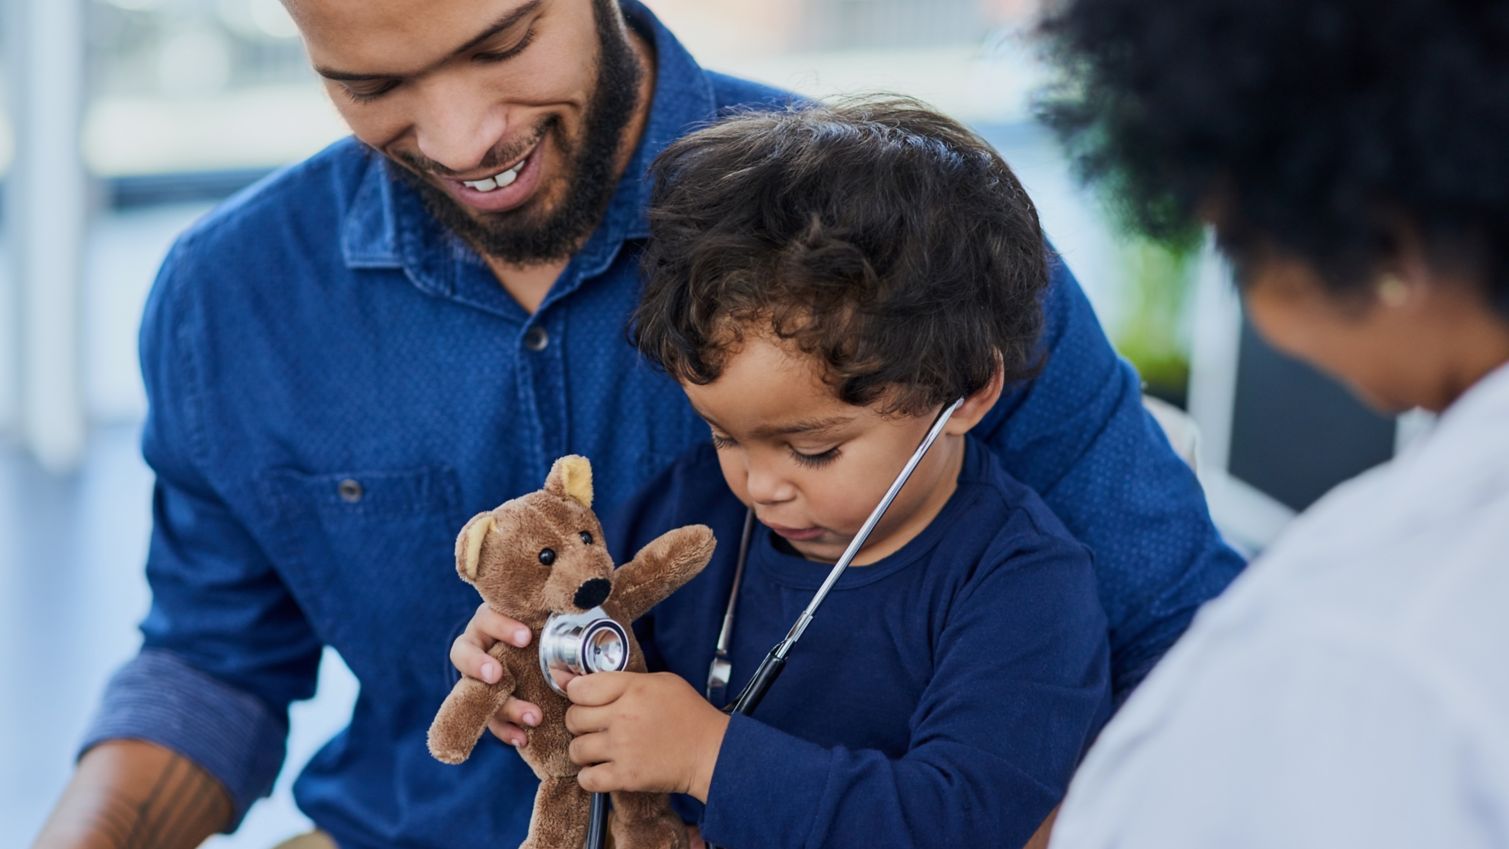 Young boy examines teddy bear while dad and doctor watch